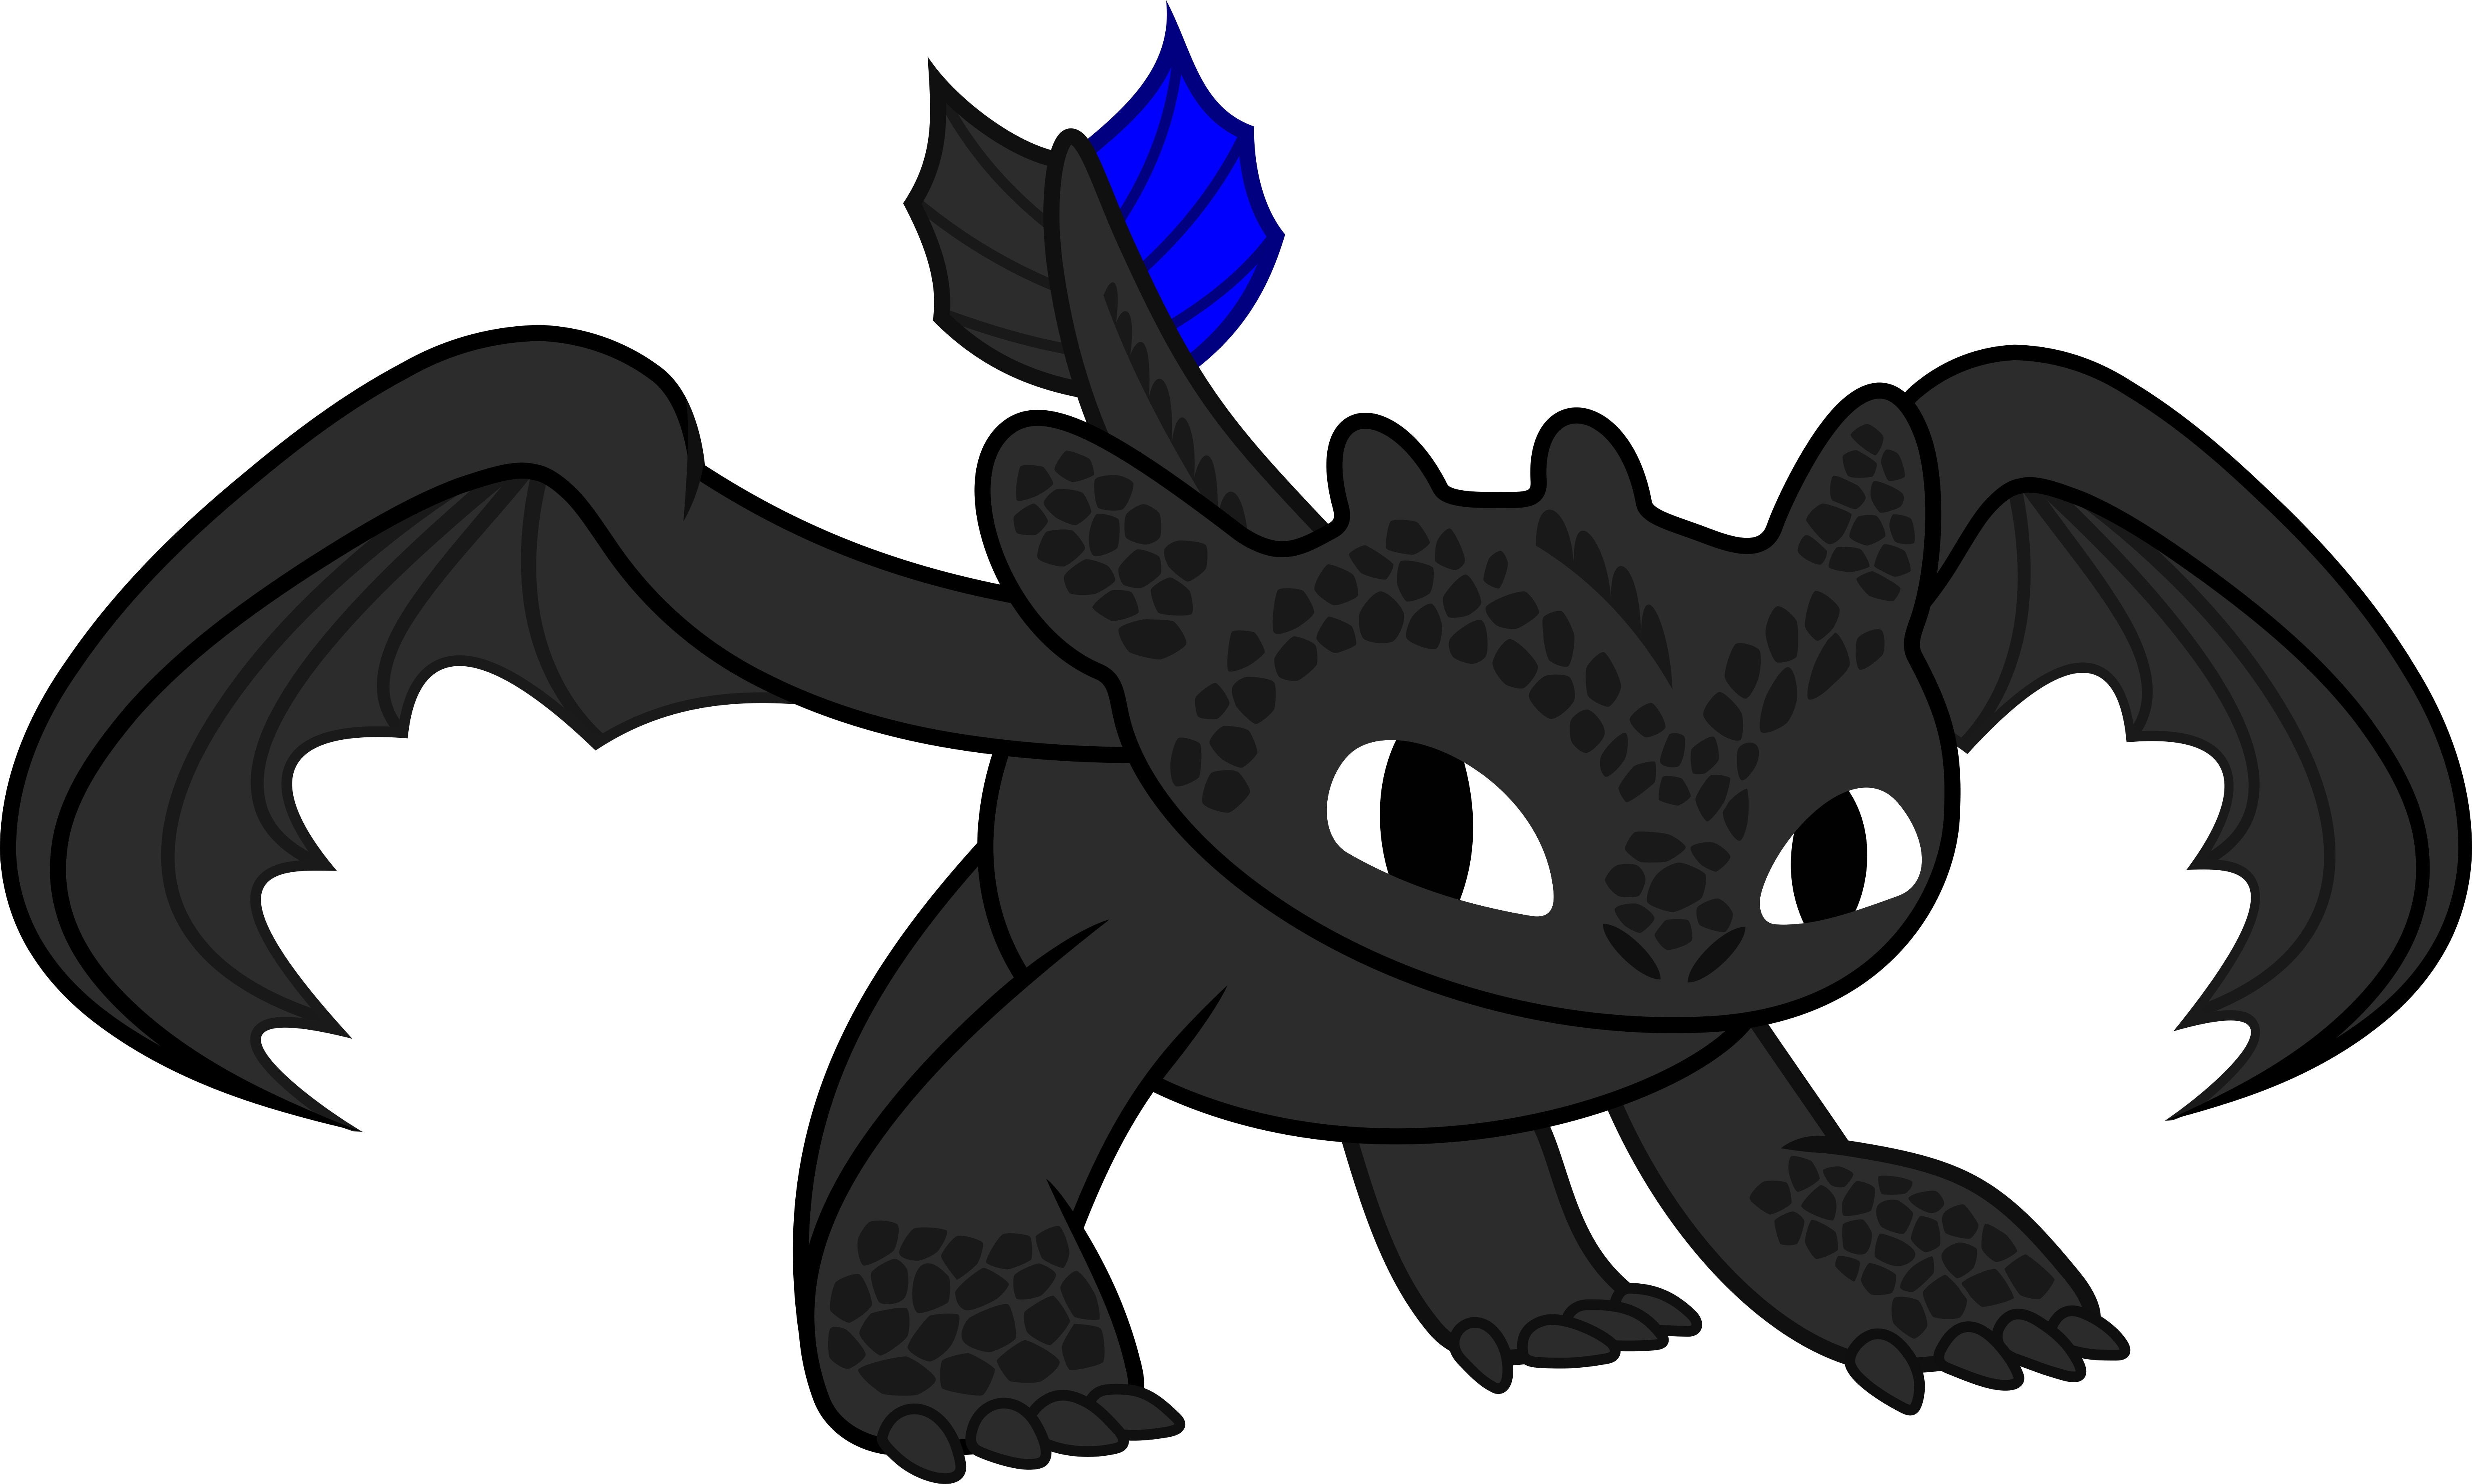 Toothless By Imageconstructor On Deviantart